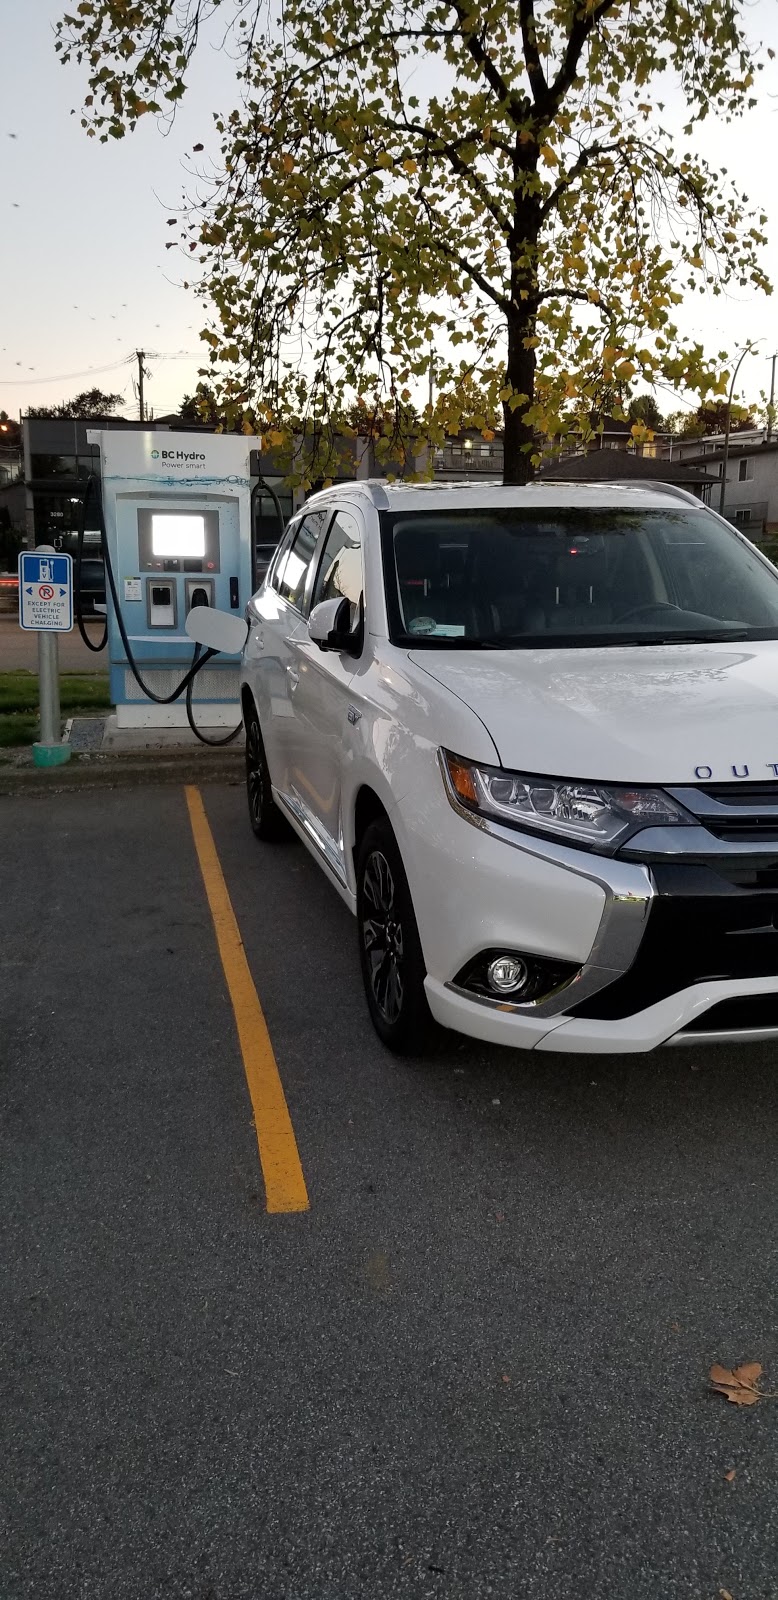 BC Hydro Charging Station | 3185 Grandview Hwy, Vancouver, BC V5M 2E9, Canada | Phone: (866) 338-3369